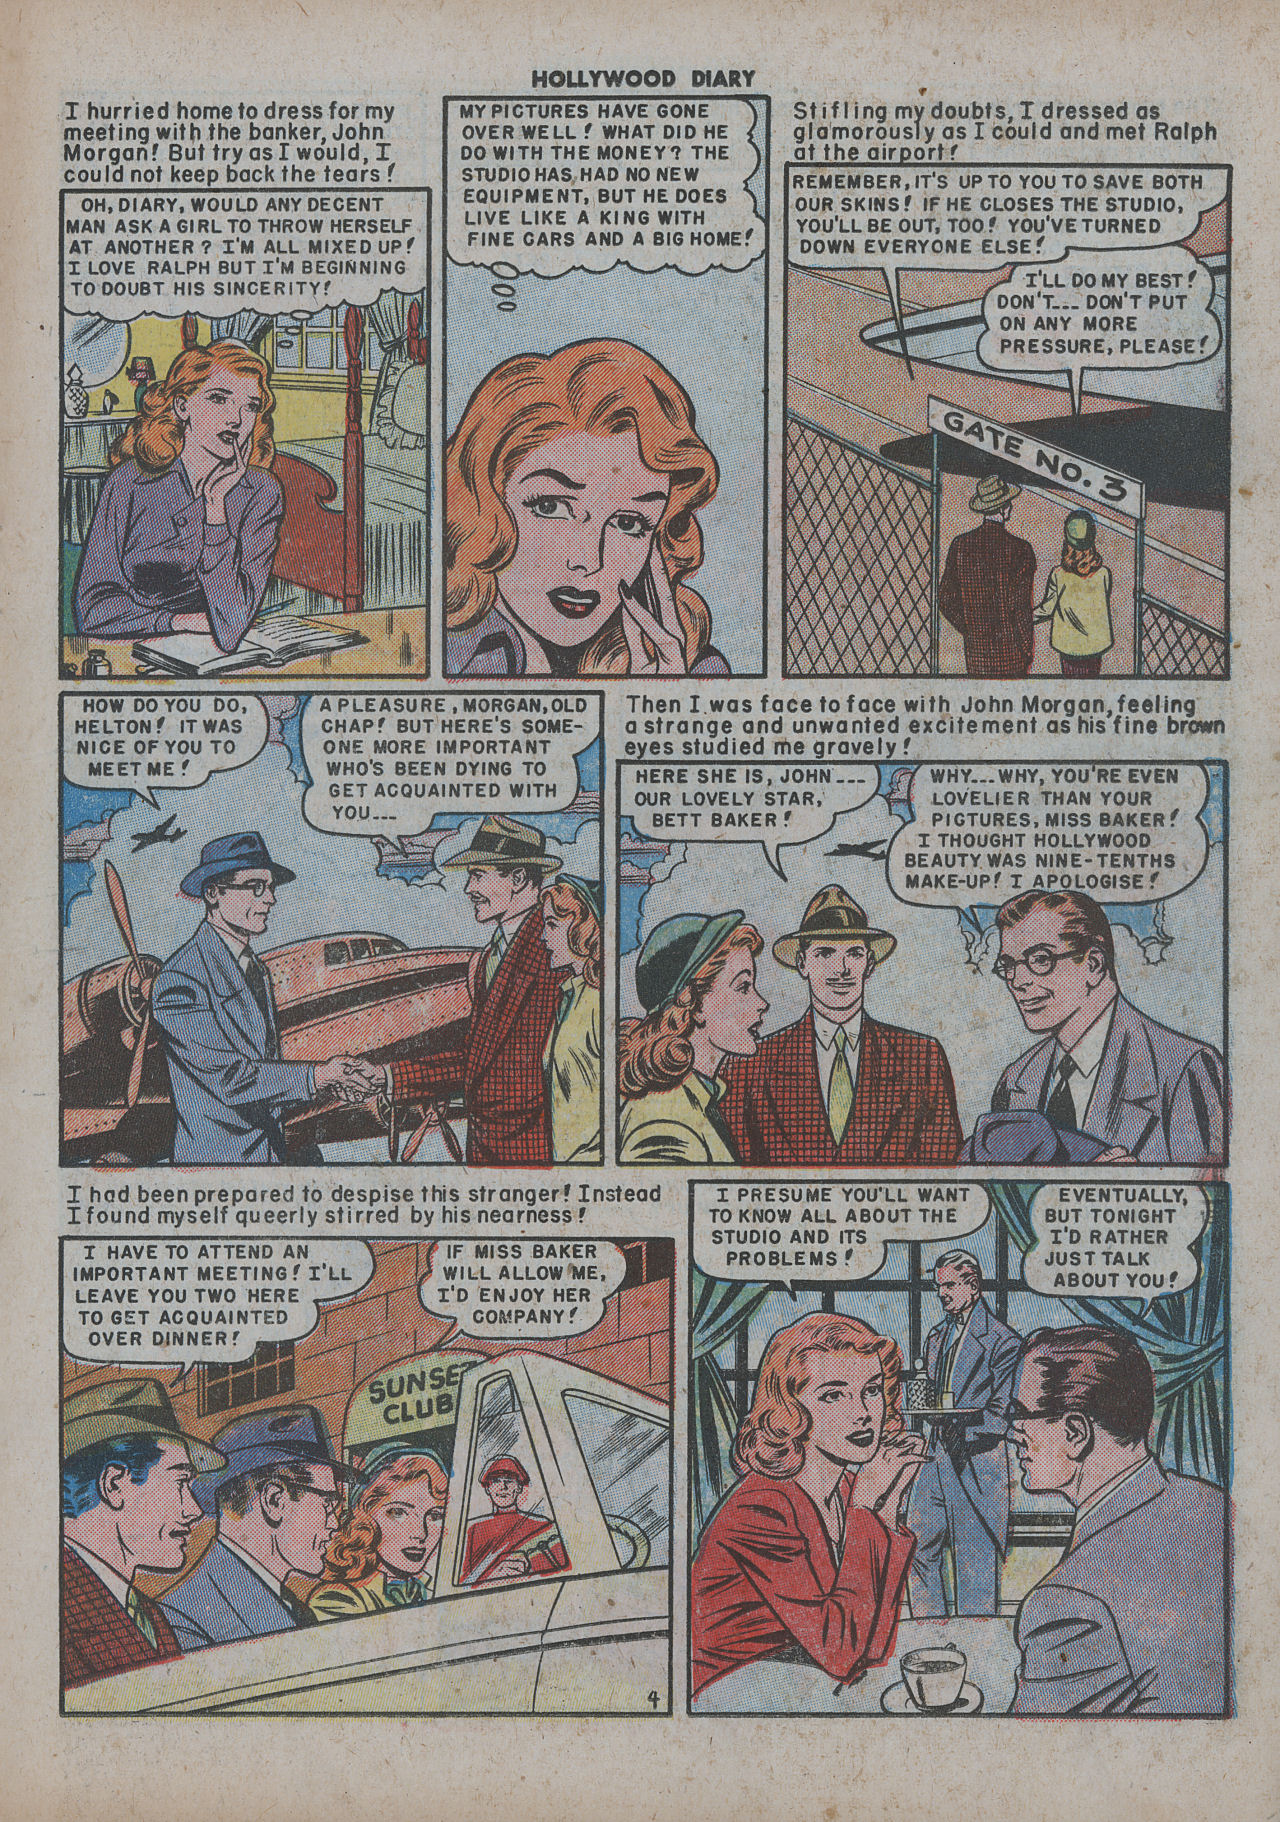 Read online Hollywood Diary comic -  Issue #3 - 15